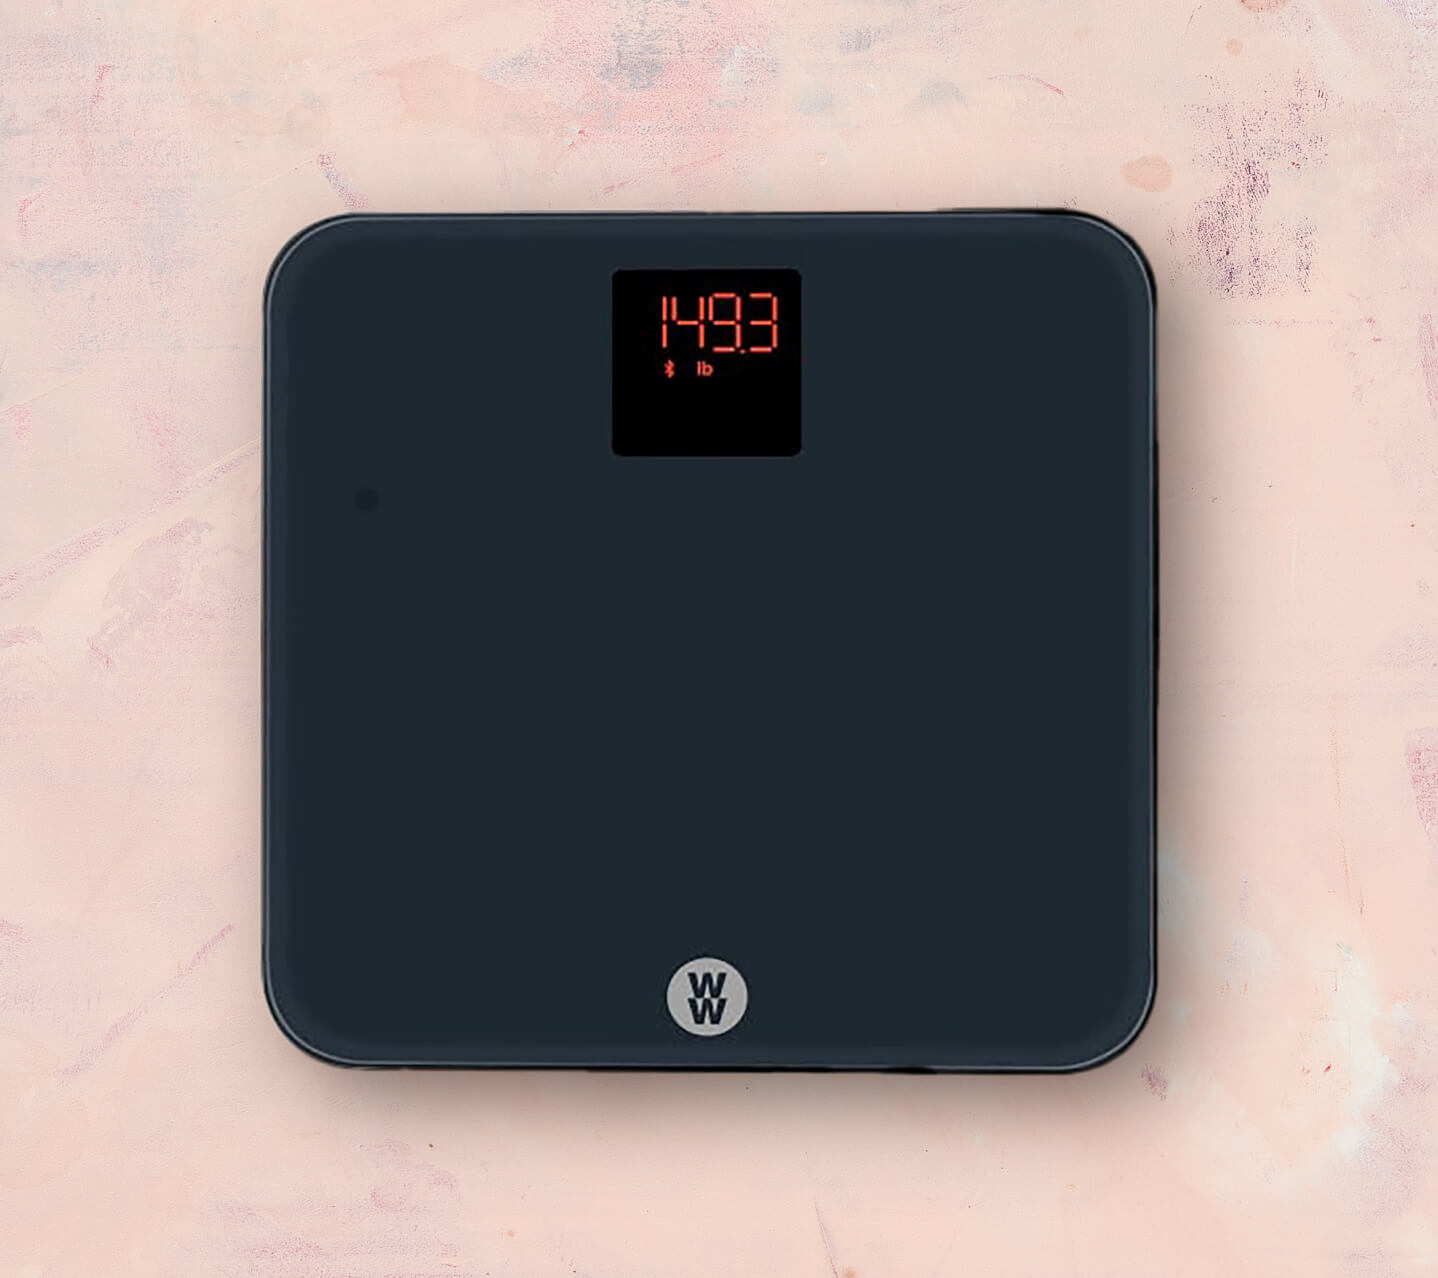 Bluetooth body weight scale